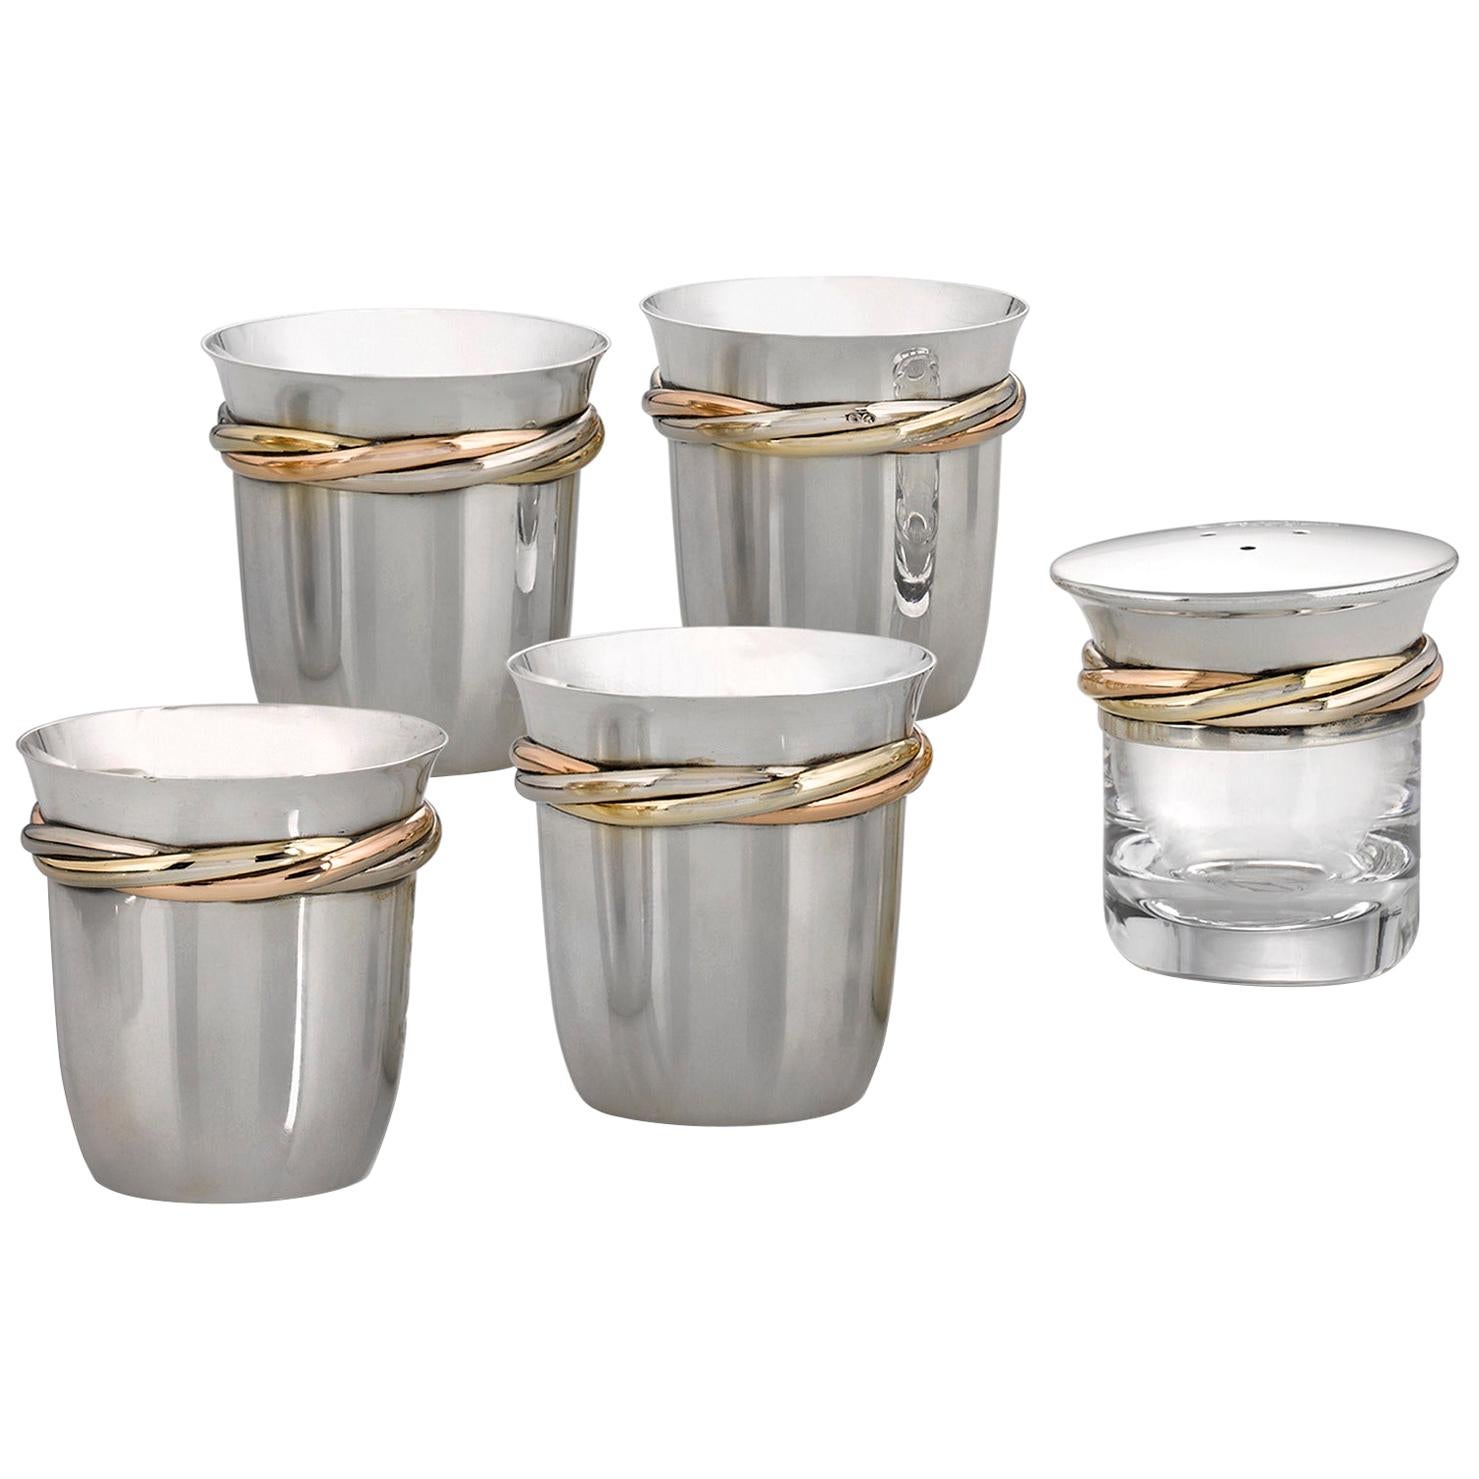 Sterling Silver and Gilt Tequila Set by Cartier